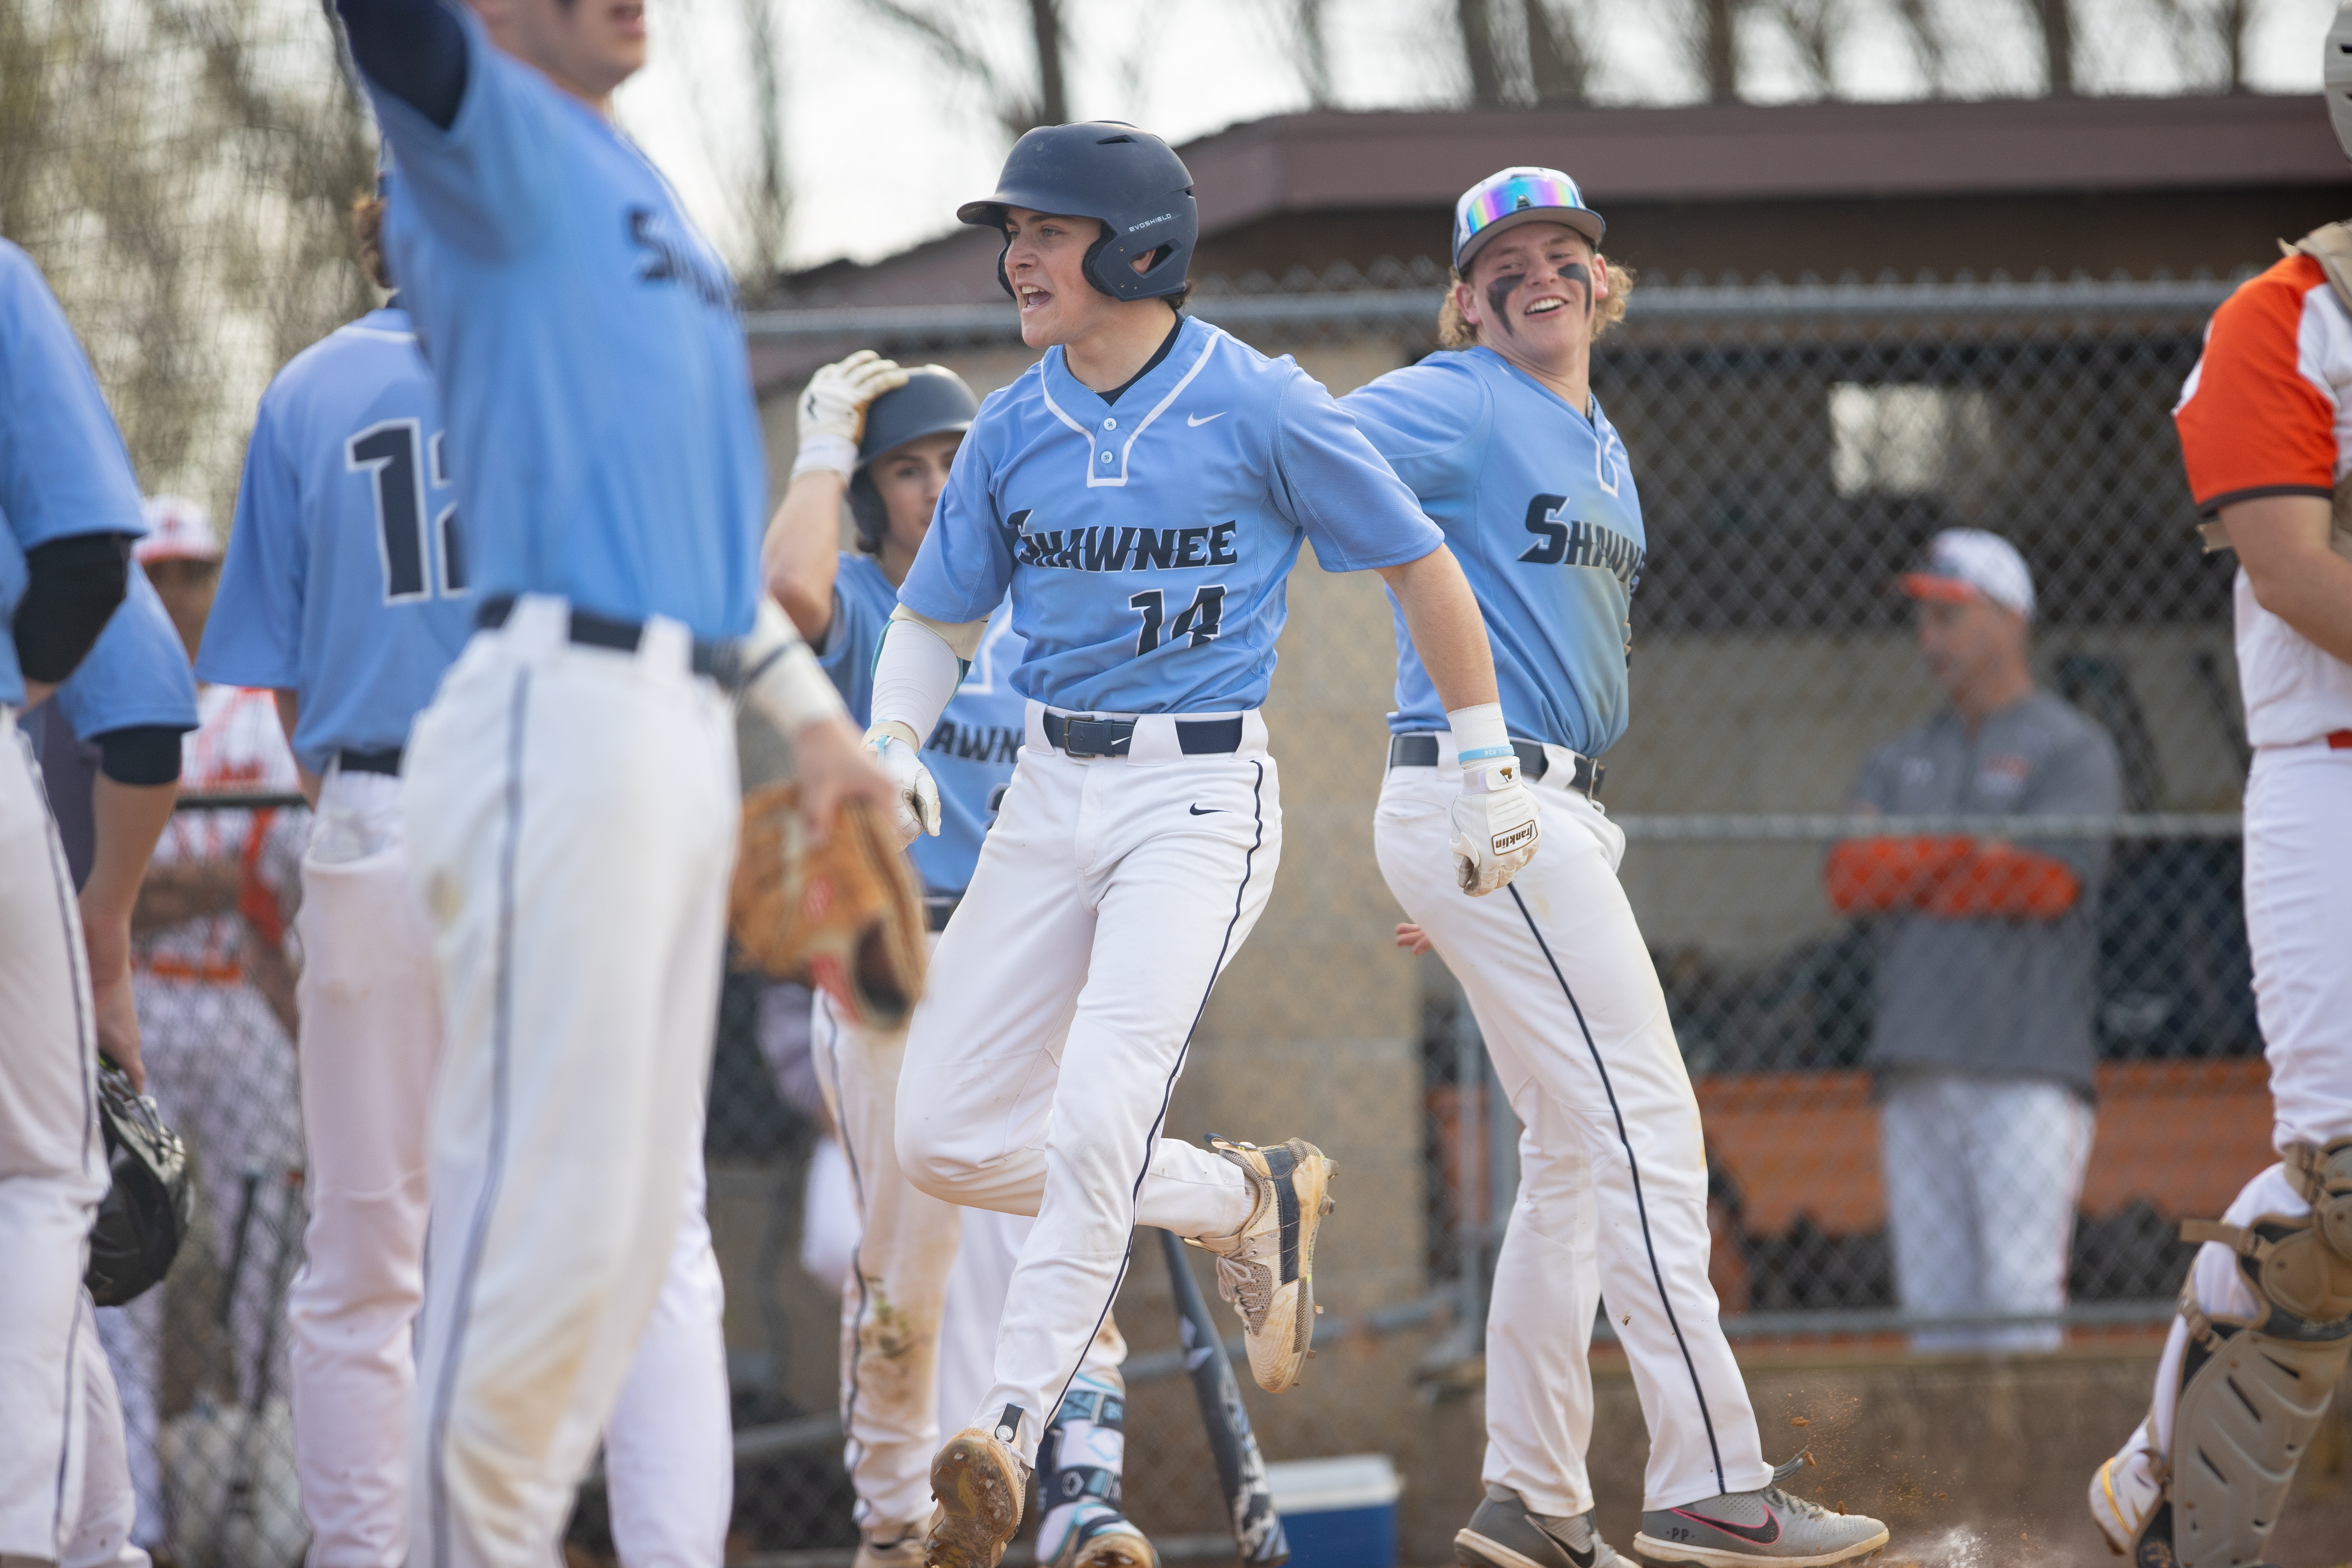 Reid Uccello (14) of Shawnee, celebrates after hitting a home run in Marlton, NJ on Monday, April 3, 2023.